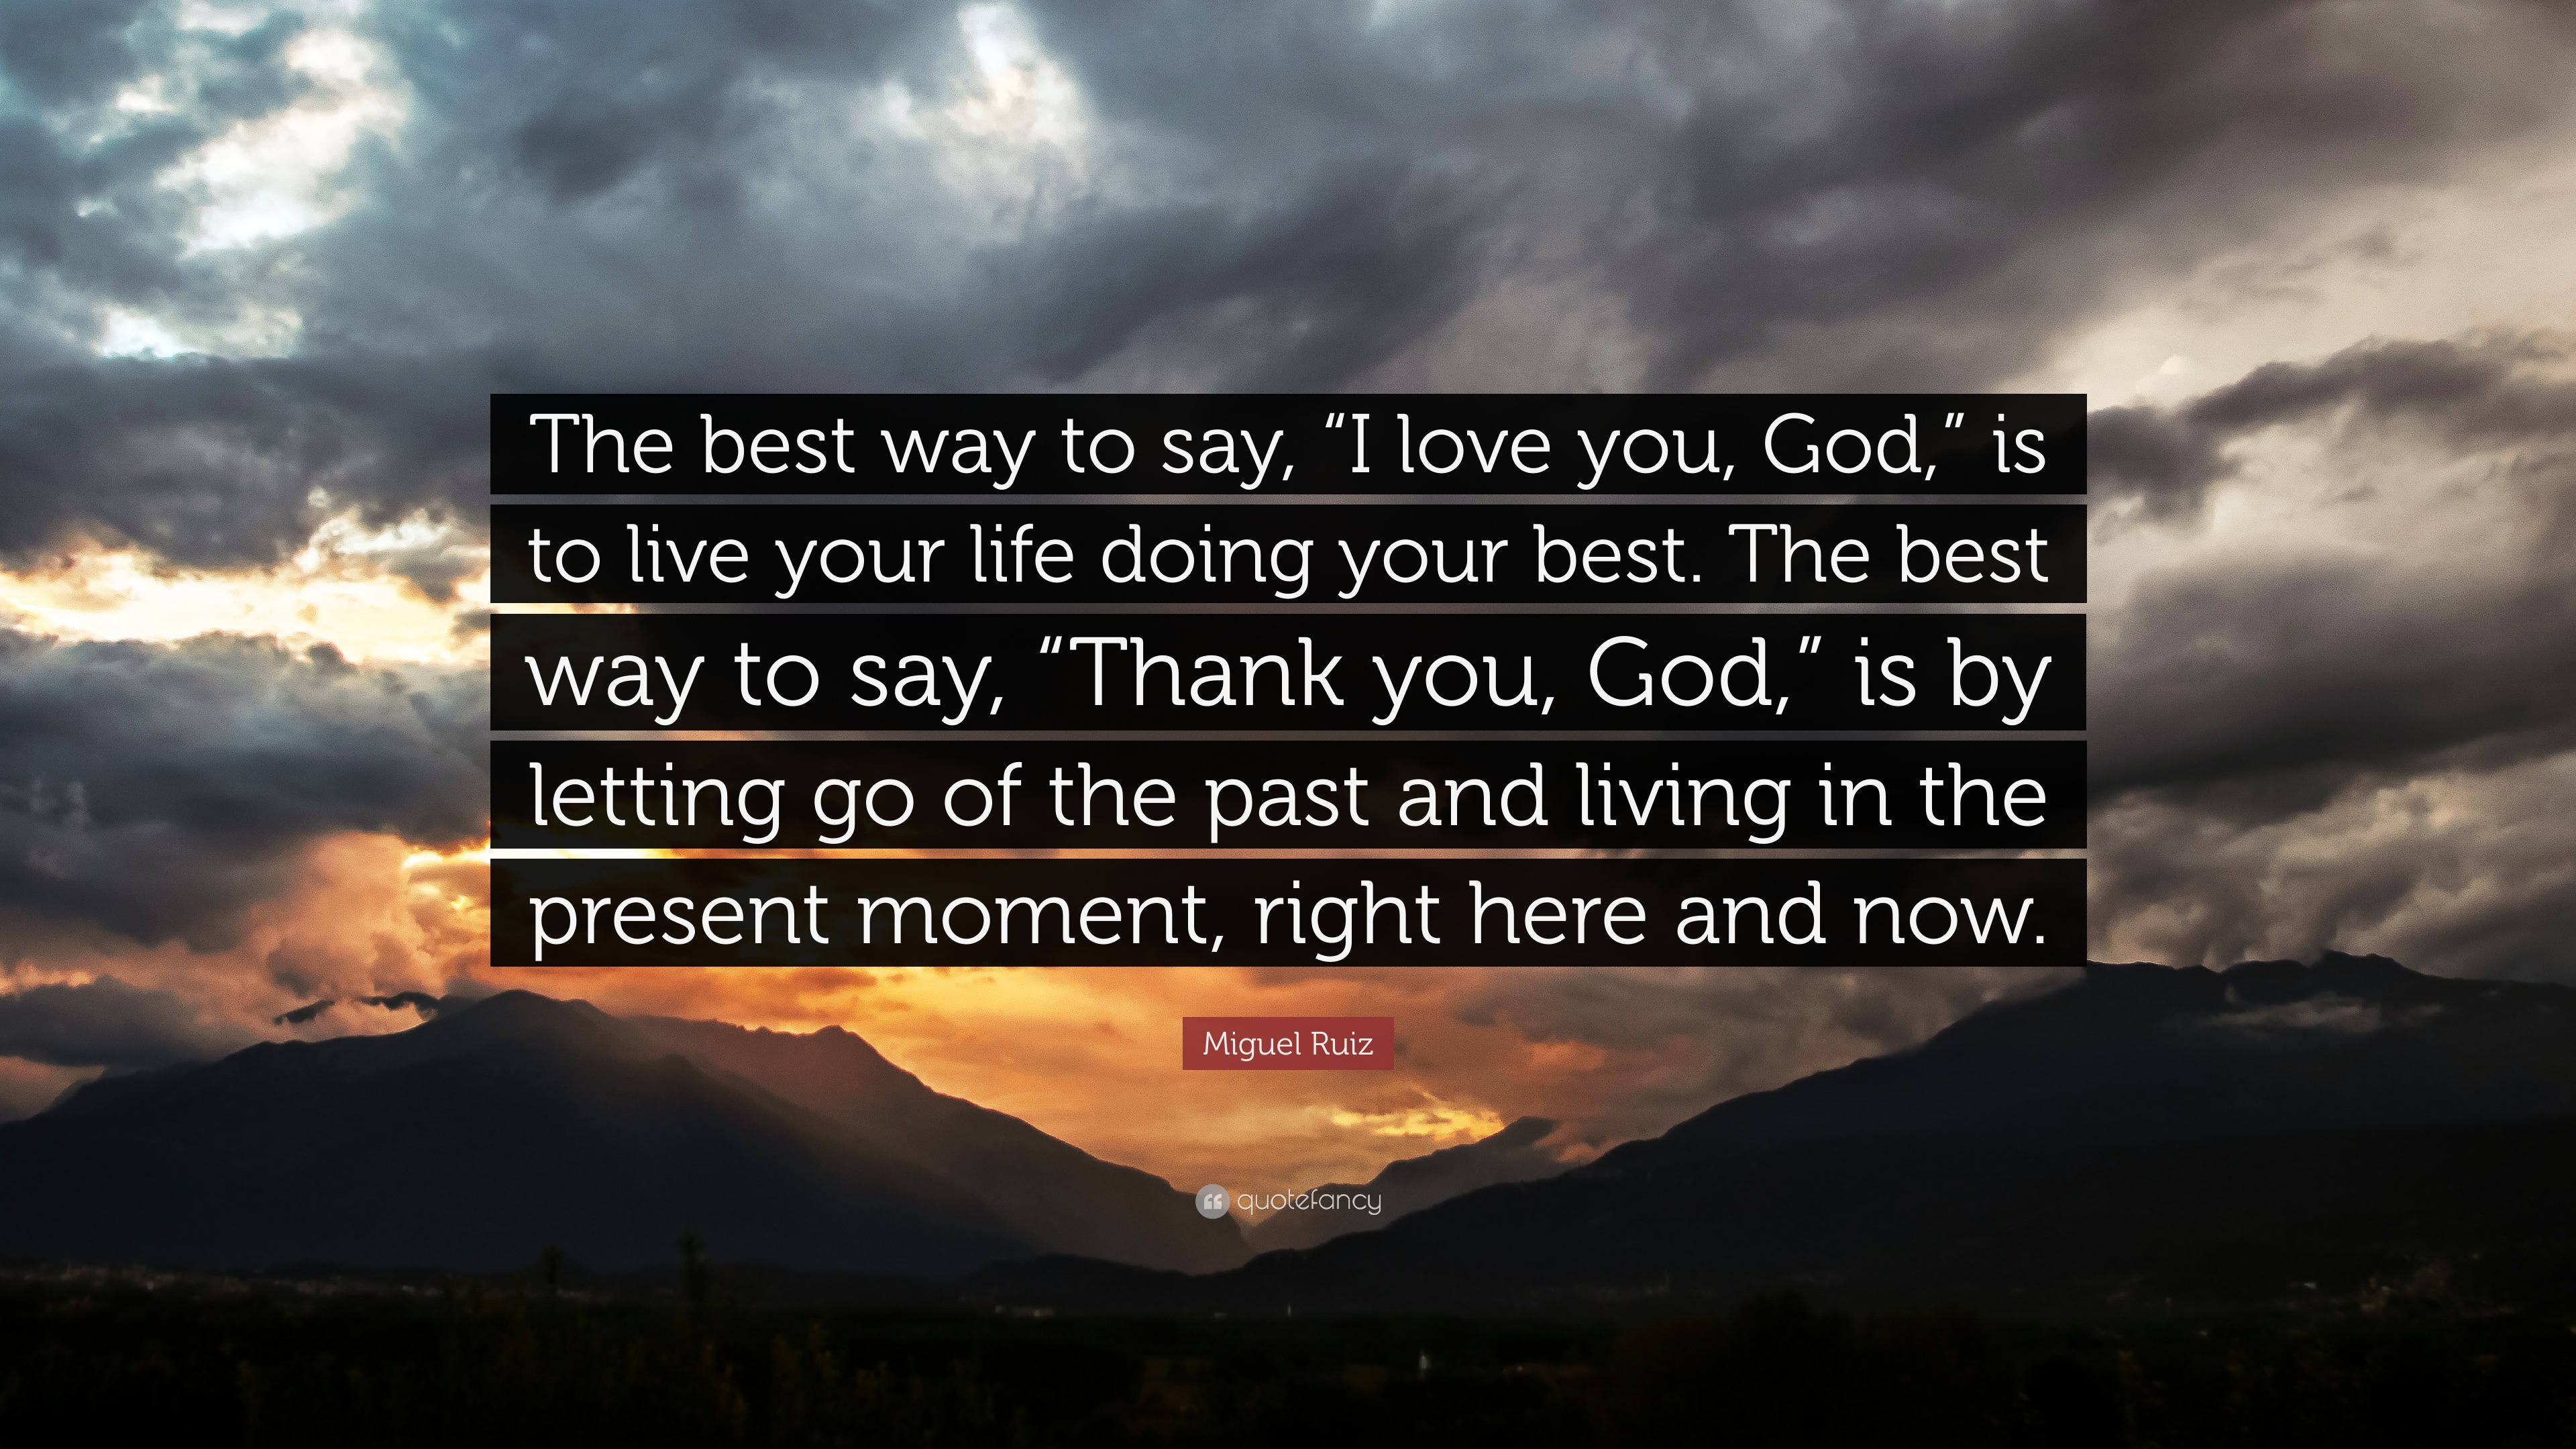 Miguel Ruiz Quote “The best way to say “I love you